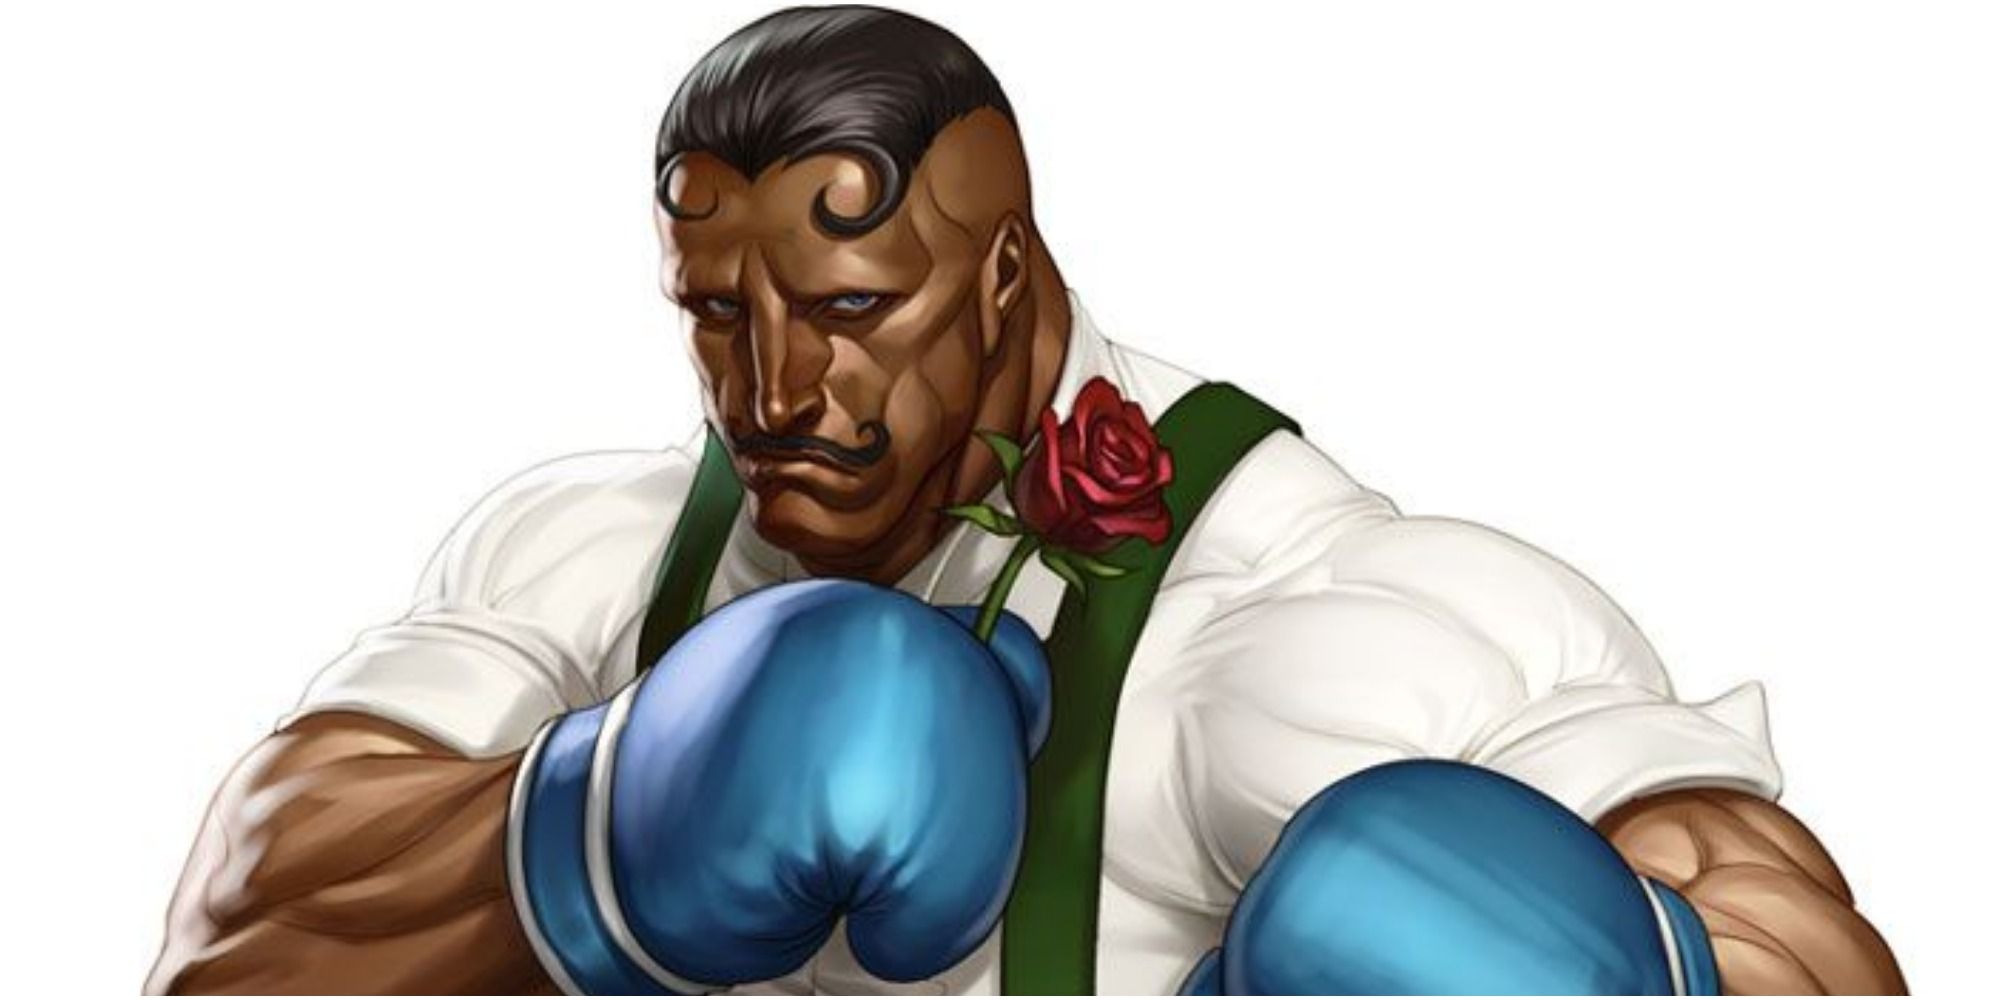 Dudley from Street Fighter